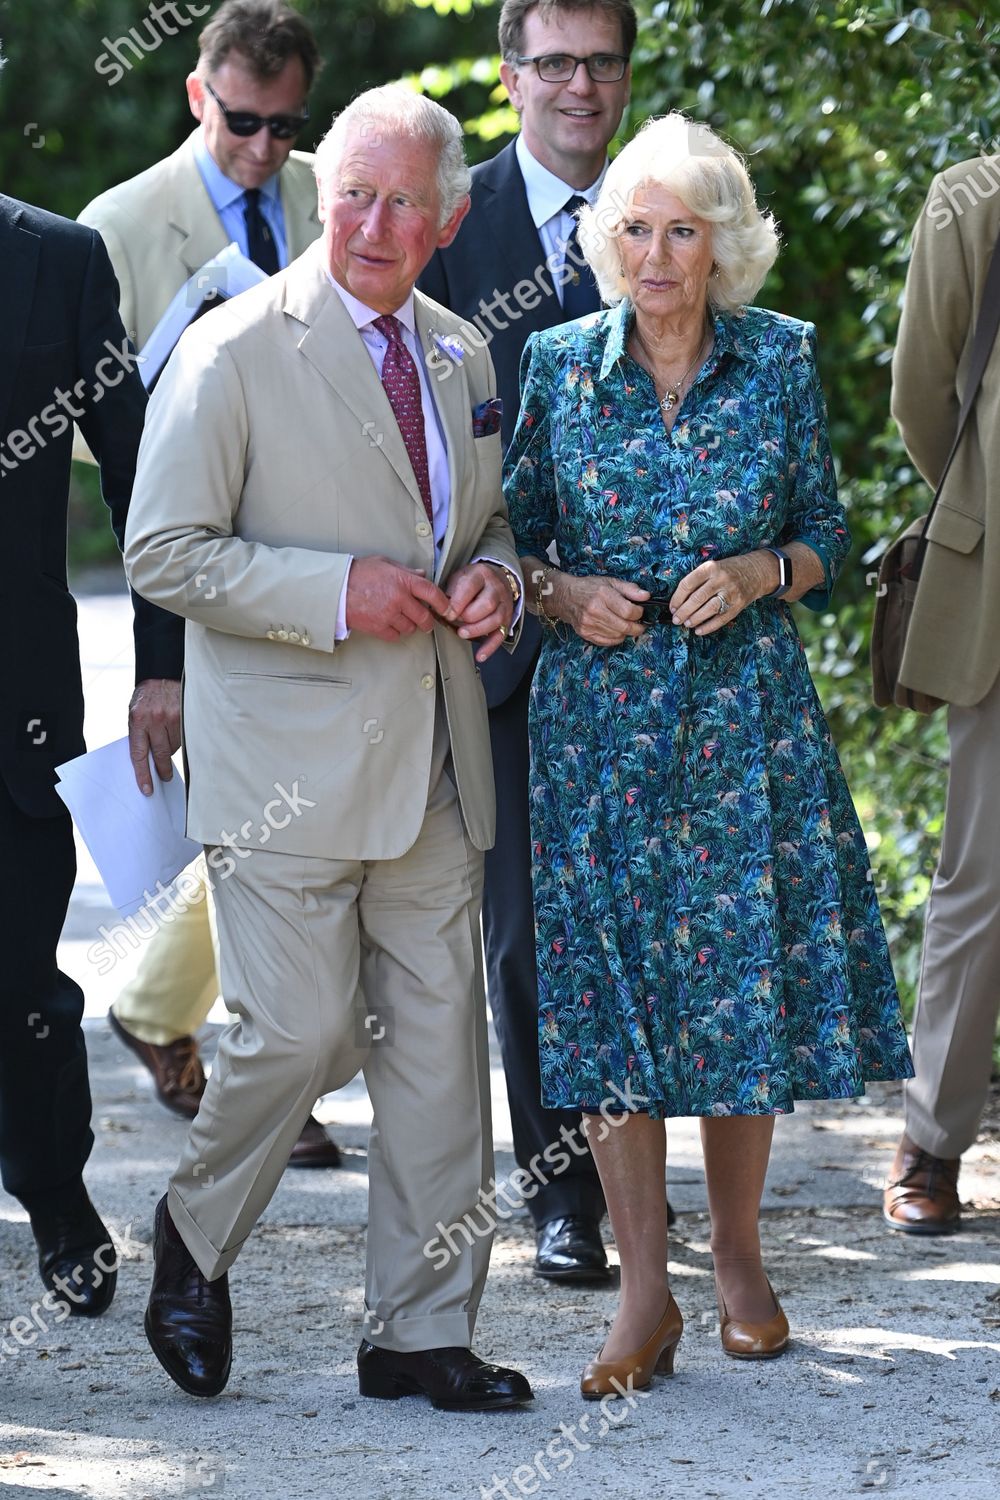 prince-charles-and-camilla-duchess-of-cornwall-visit-to-devon-and-cornwall-day-2-uk-shutterstock-editorial-12222608x.jpg